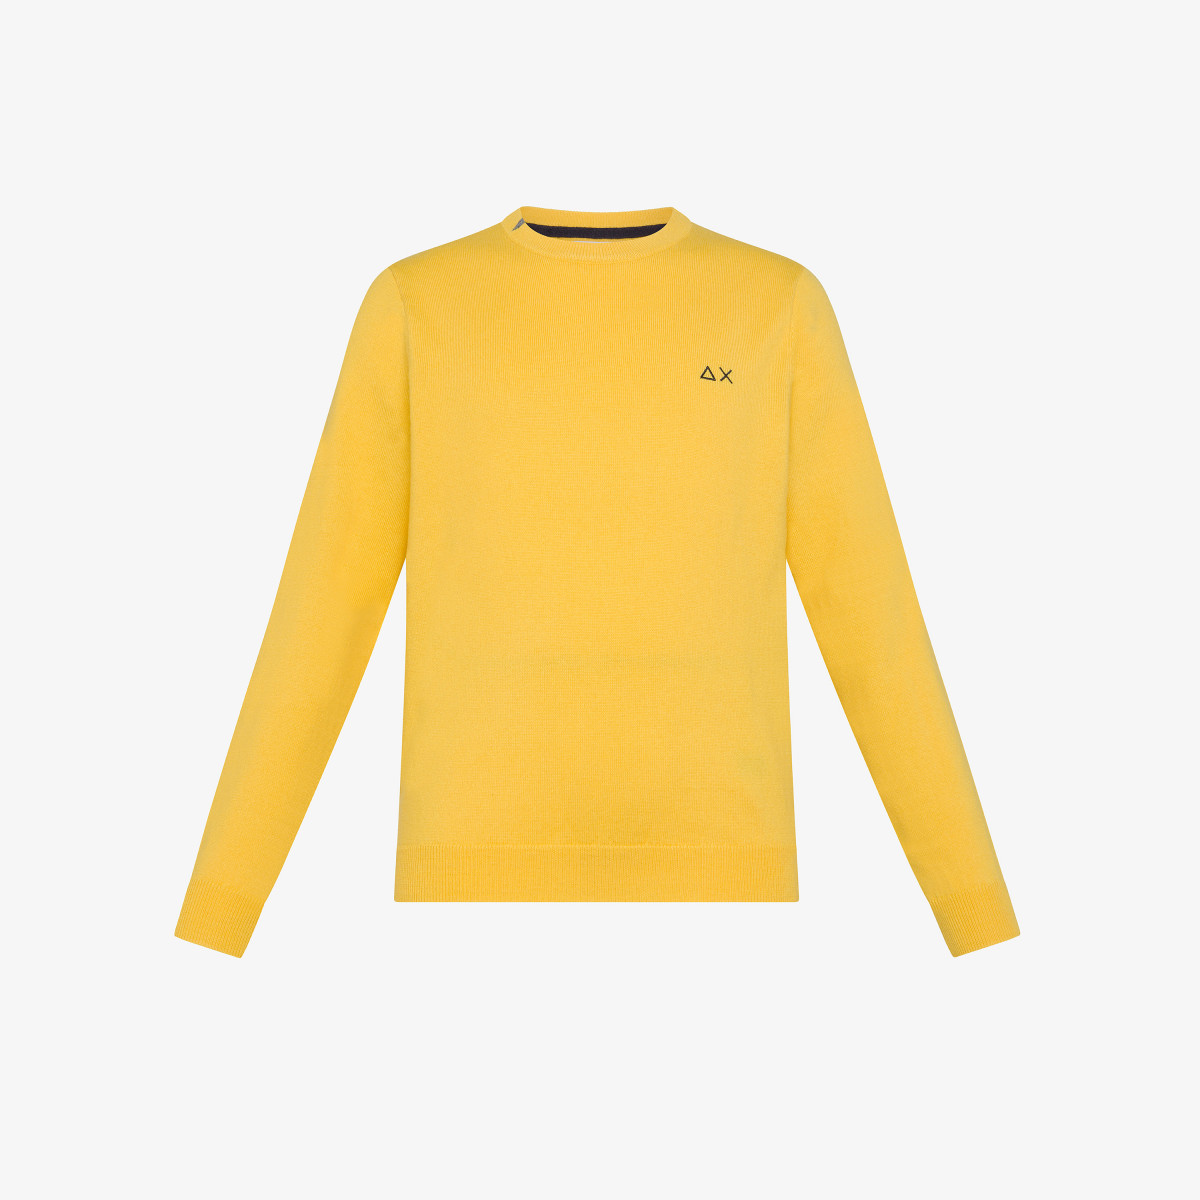 BOY'S ROUND SOLID YELLOW